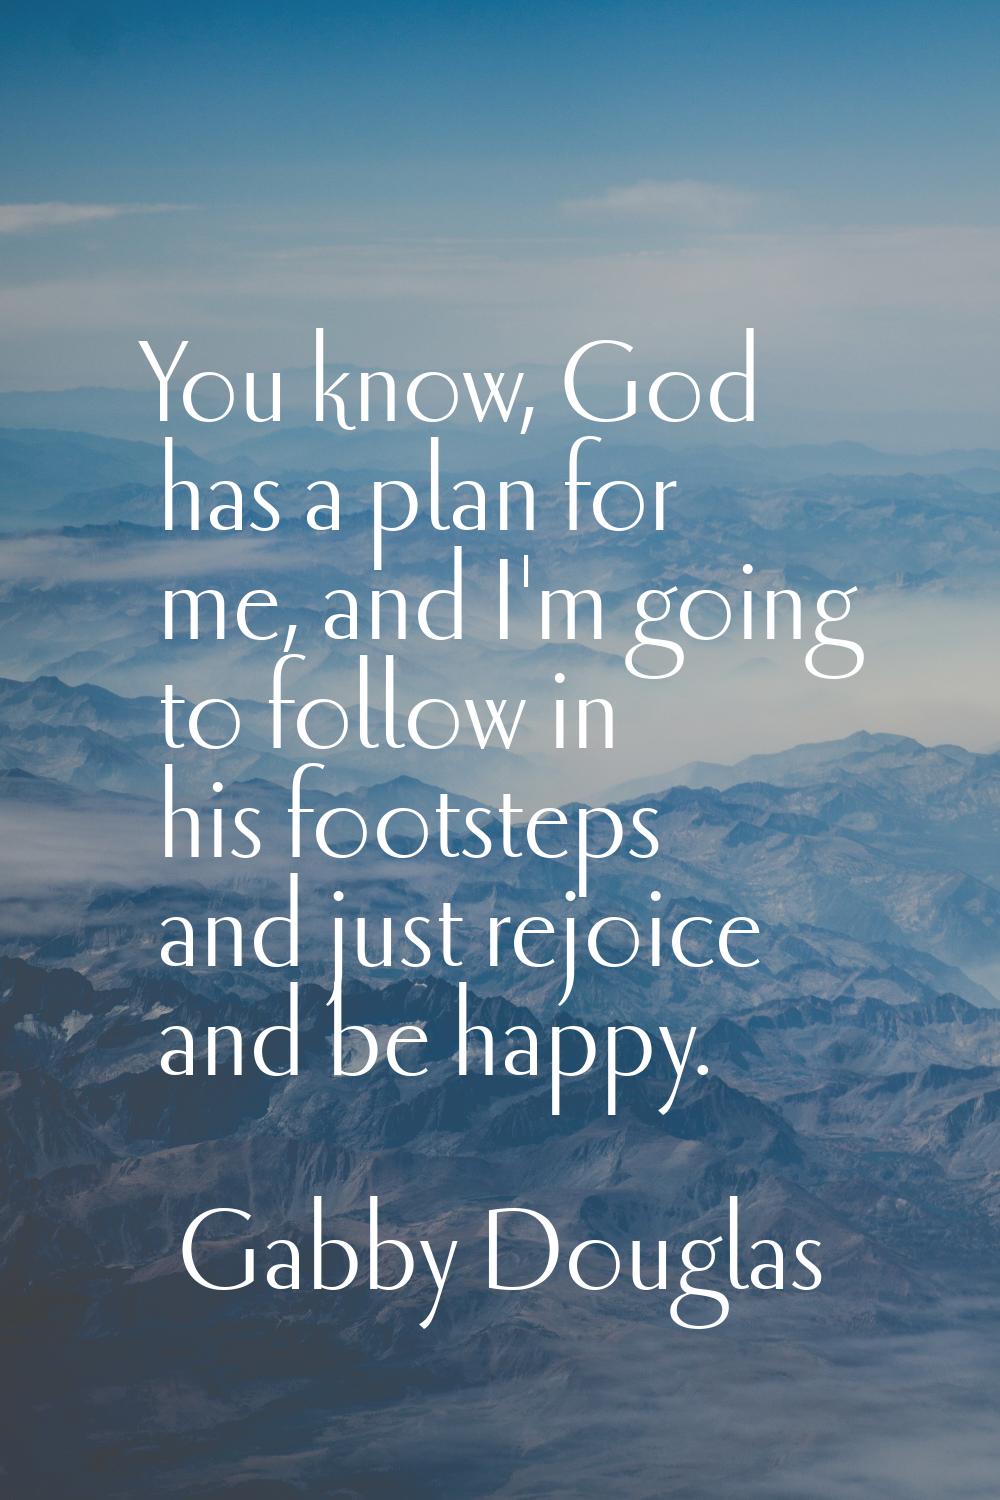 You know, God has a plan for me, and I'm going to follow in his footsteps and just rejoice and be h